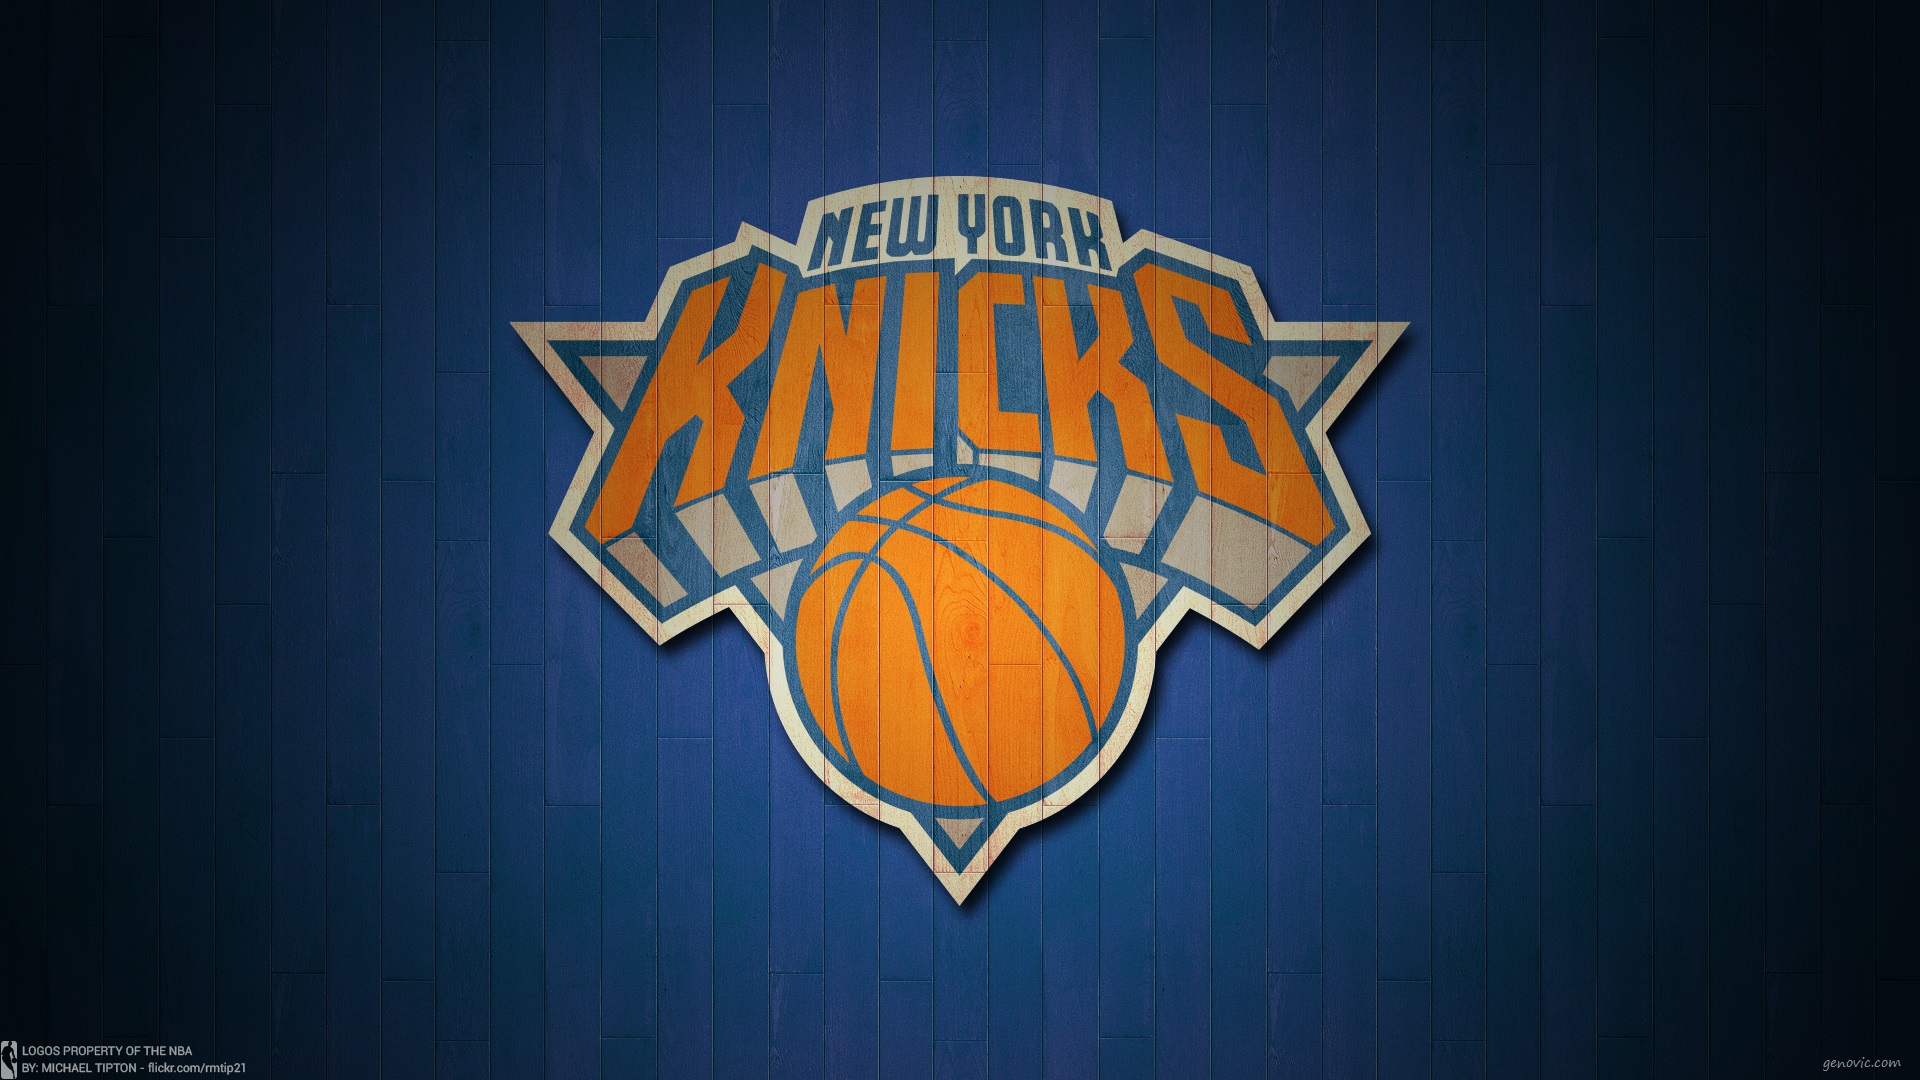 For Knicks iPhone Wallpaper Displaying Image